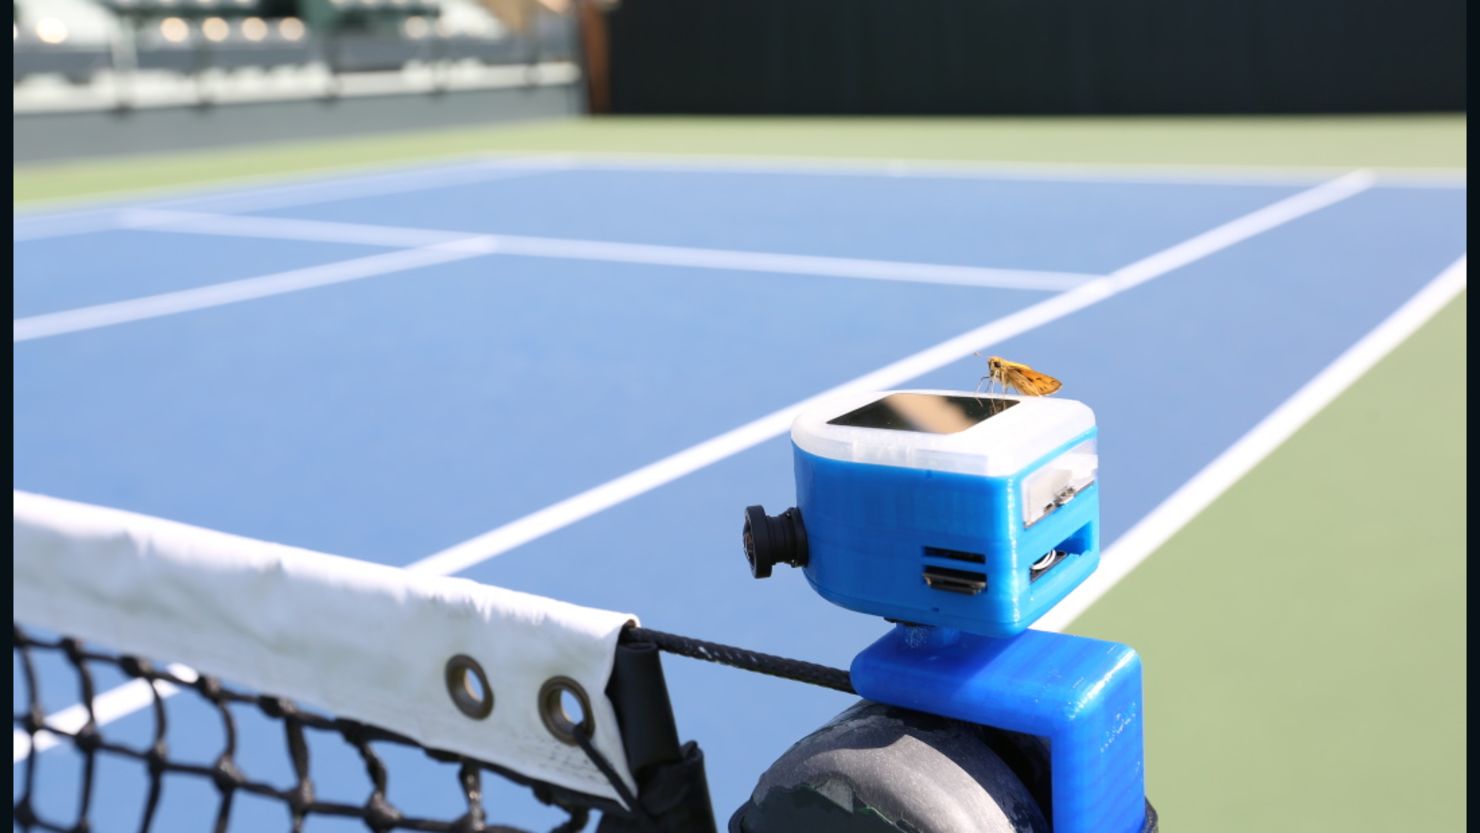 The In/Out device uses artificial intelligence to track the movement and speed of the ball. 